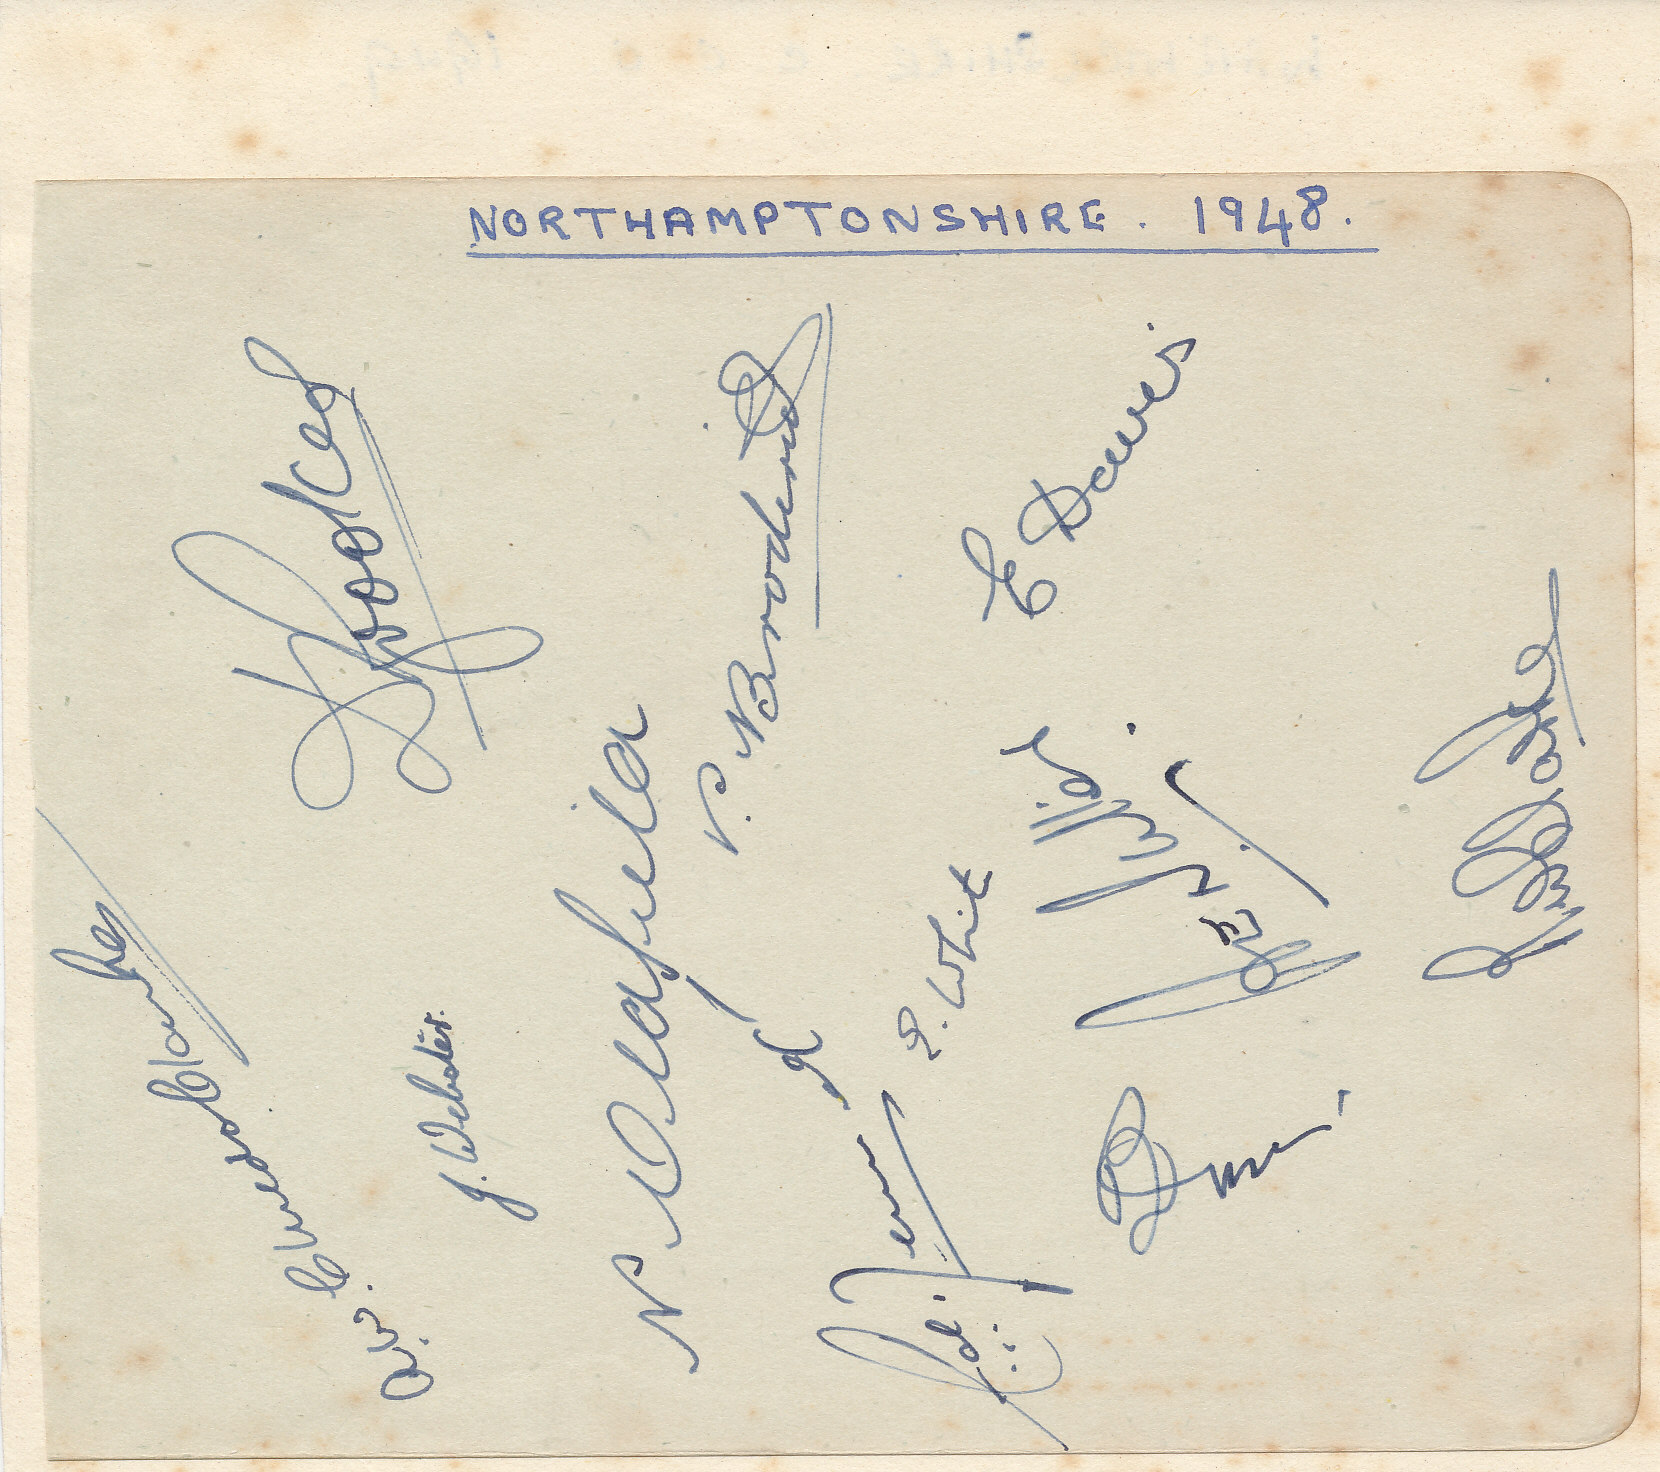 NORTHAMPTONSHIRE, 5" x 4" album page, signed by 11 members of a 1948 team (laid down to larger